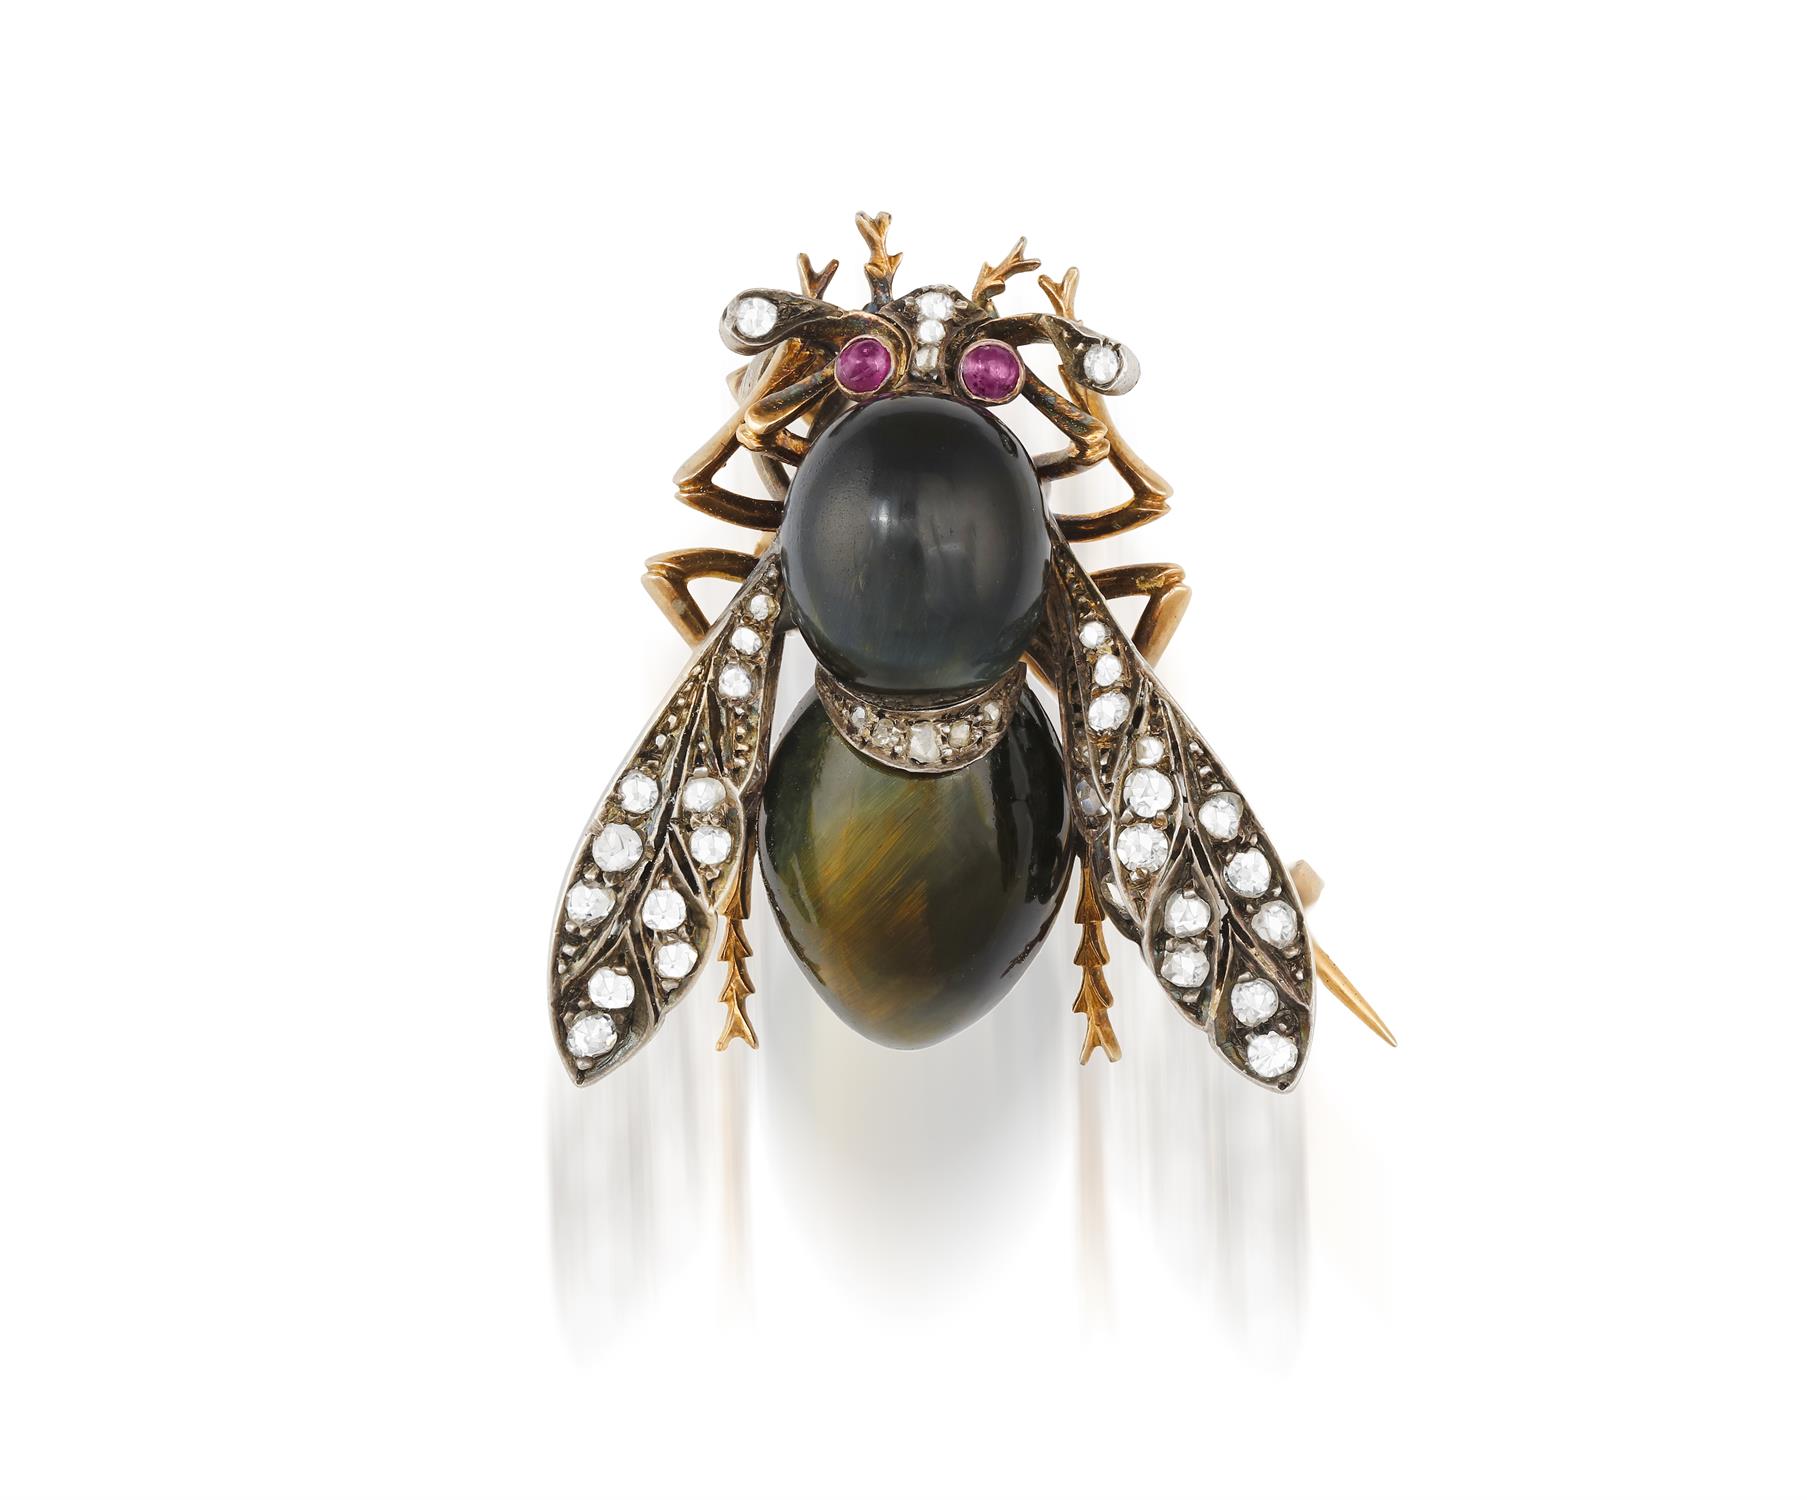 A LATE 19TH CENTURY GEM-SET NOVELTY BROOCH, FRENCH, CIRCA 1880 Realistically modelled as a bee,